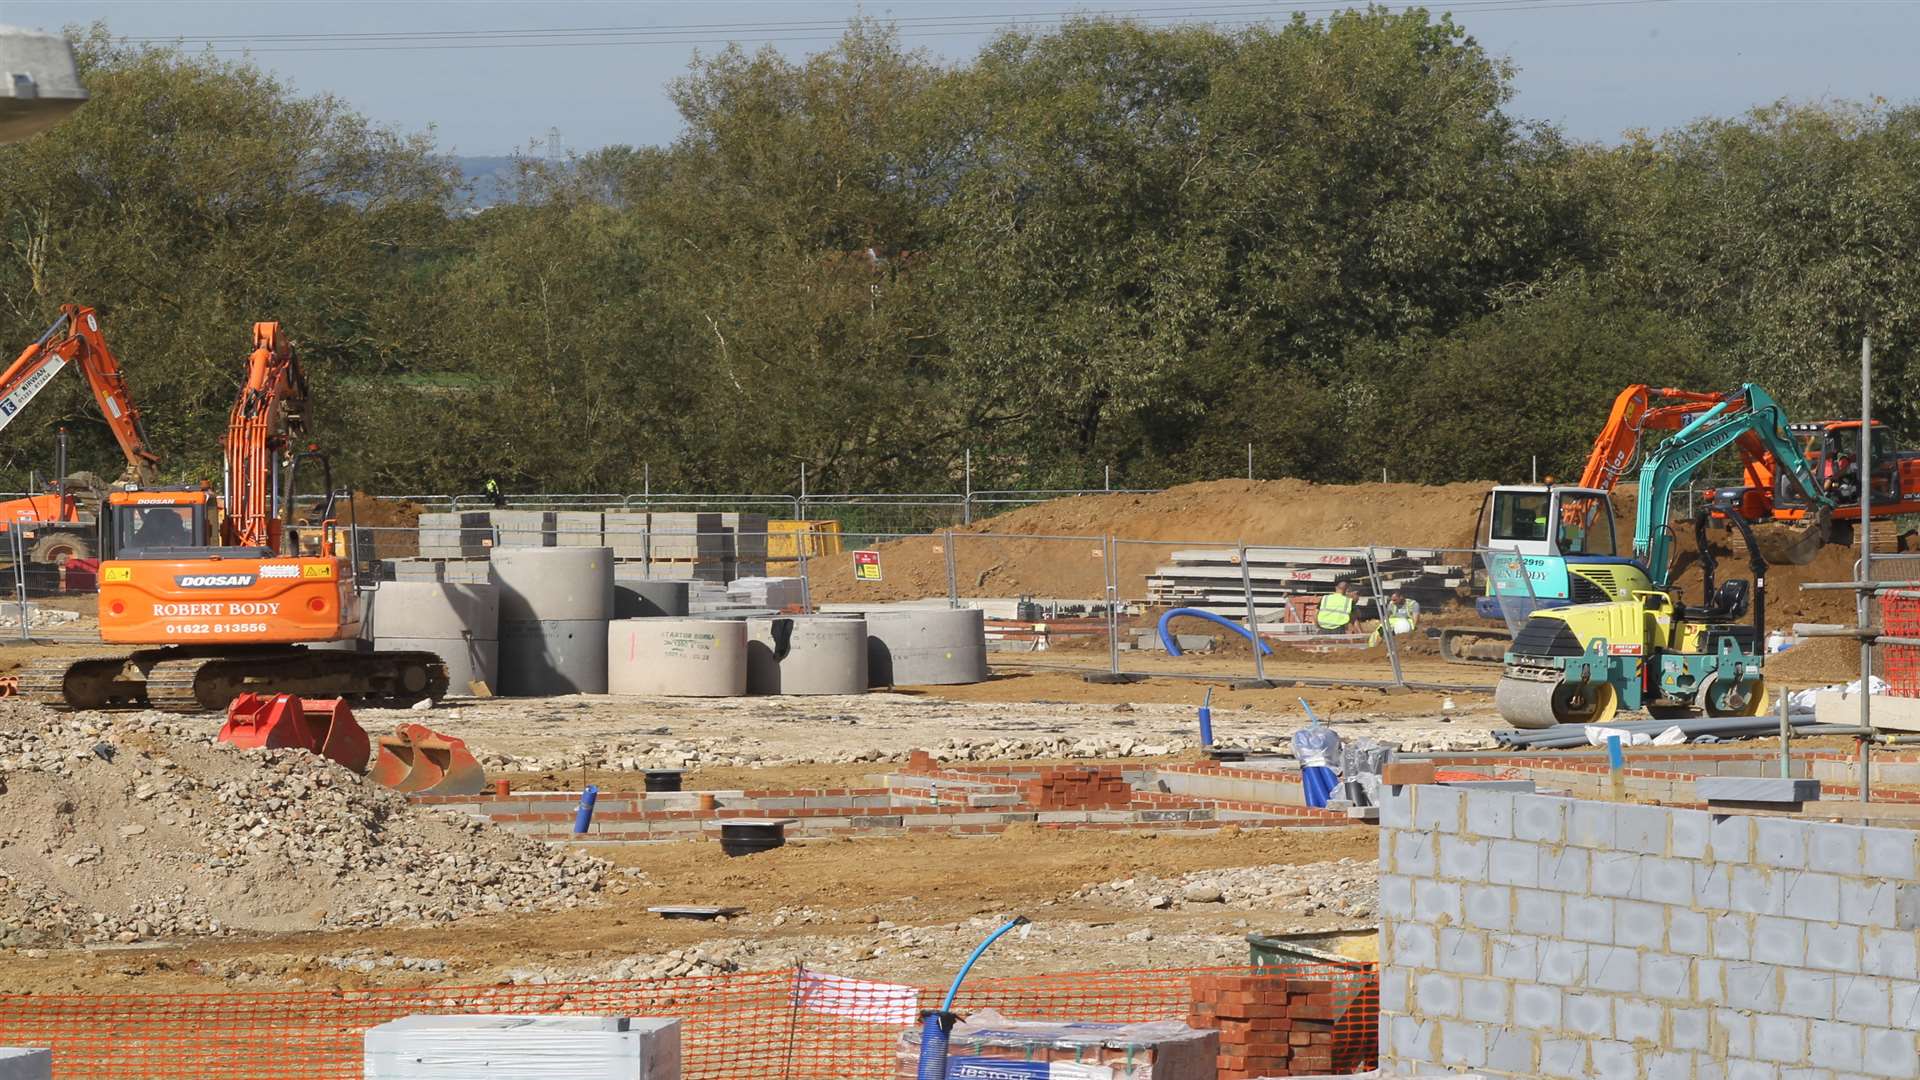 Proposals for 2,500 extra houses across Shepway go on display this week